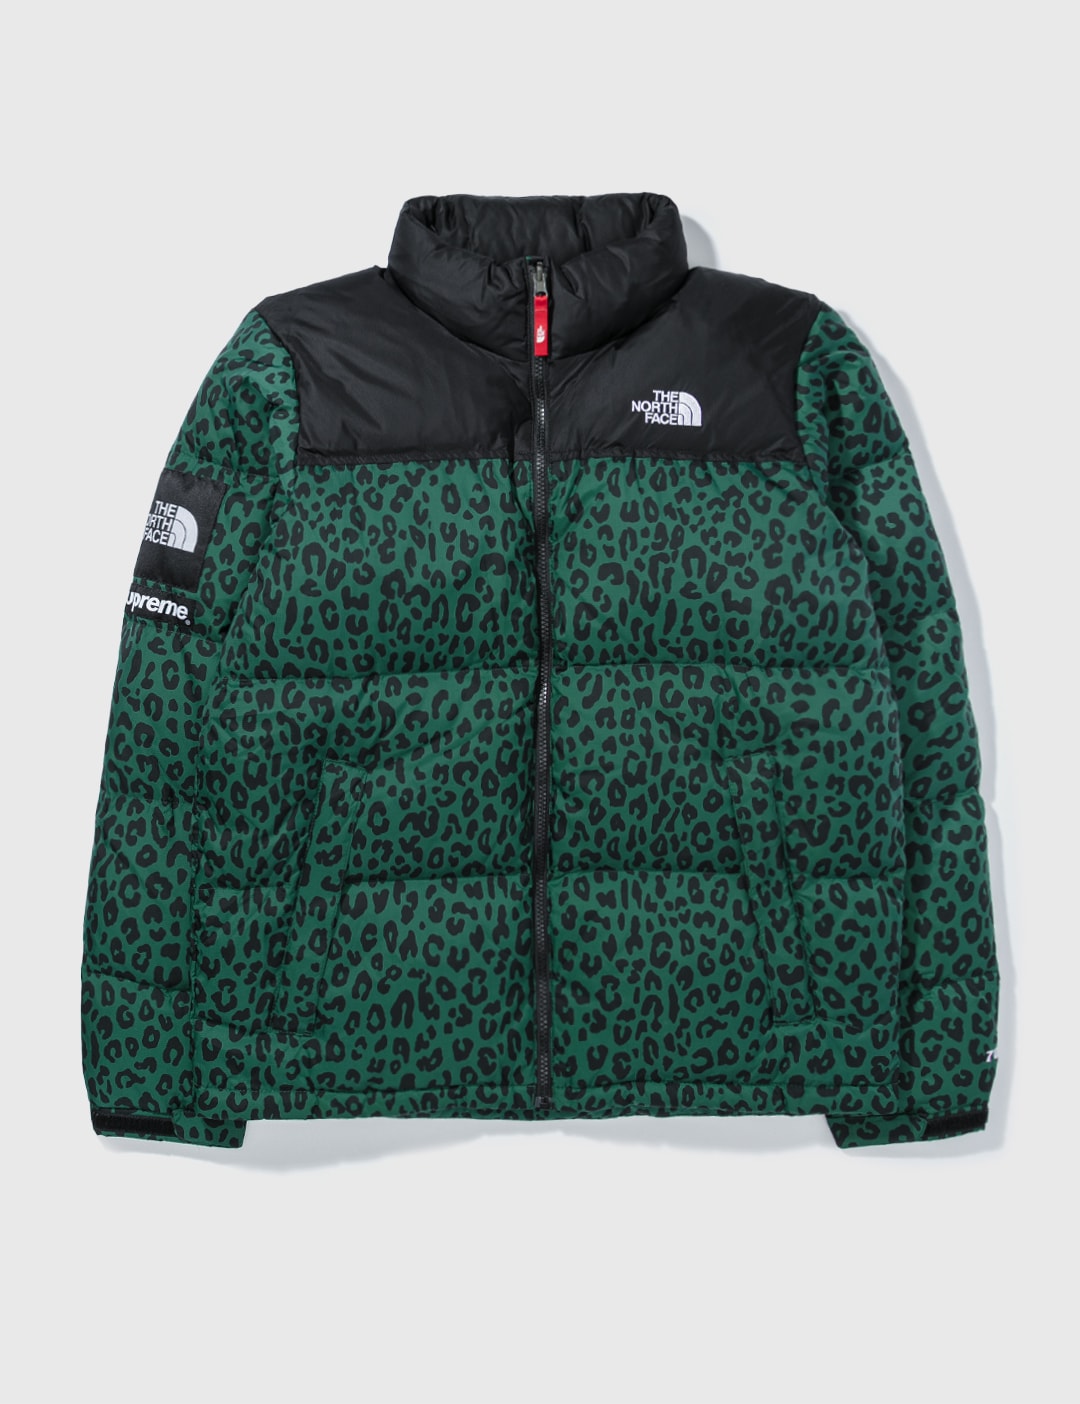 Supreme - X NORTH FACE 2011AW NUPTSE DOWN JACKET | HBX - Globally Curated Fashion and Lifestyle by Hypebeast